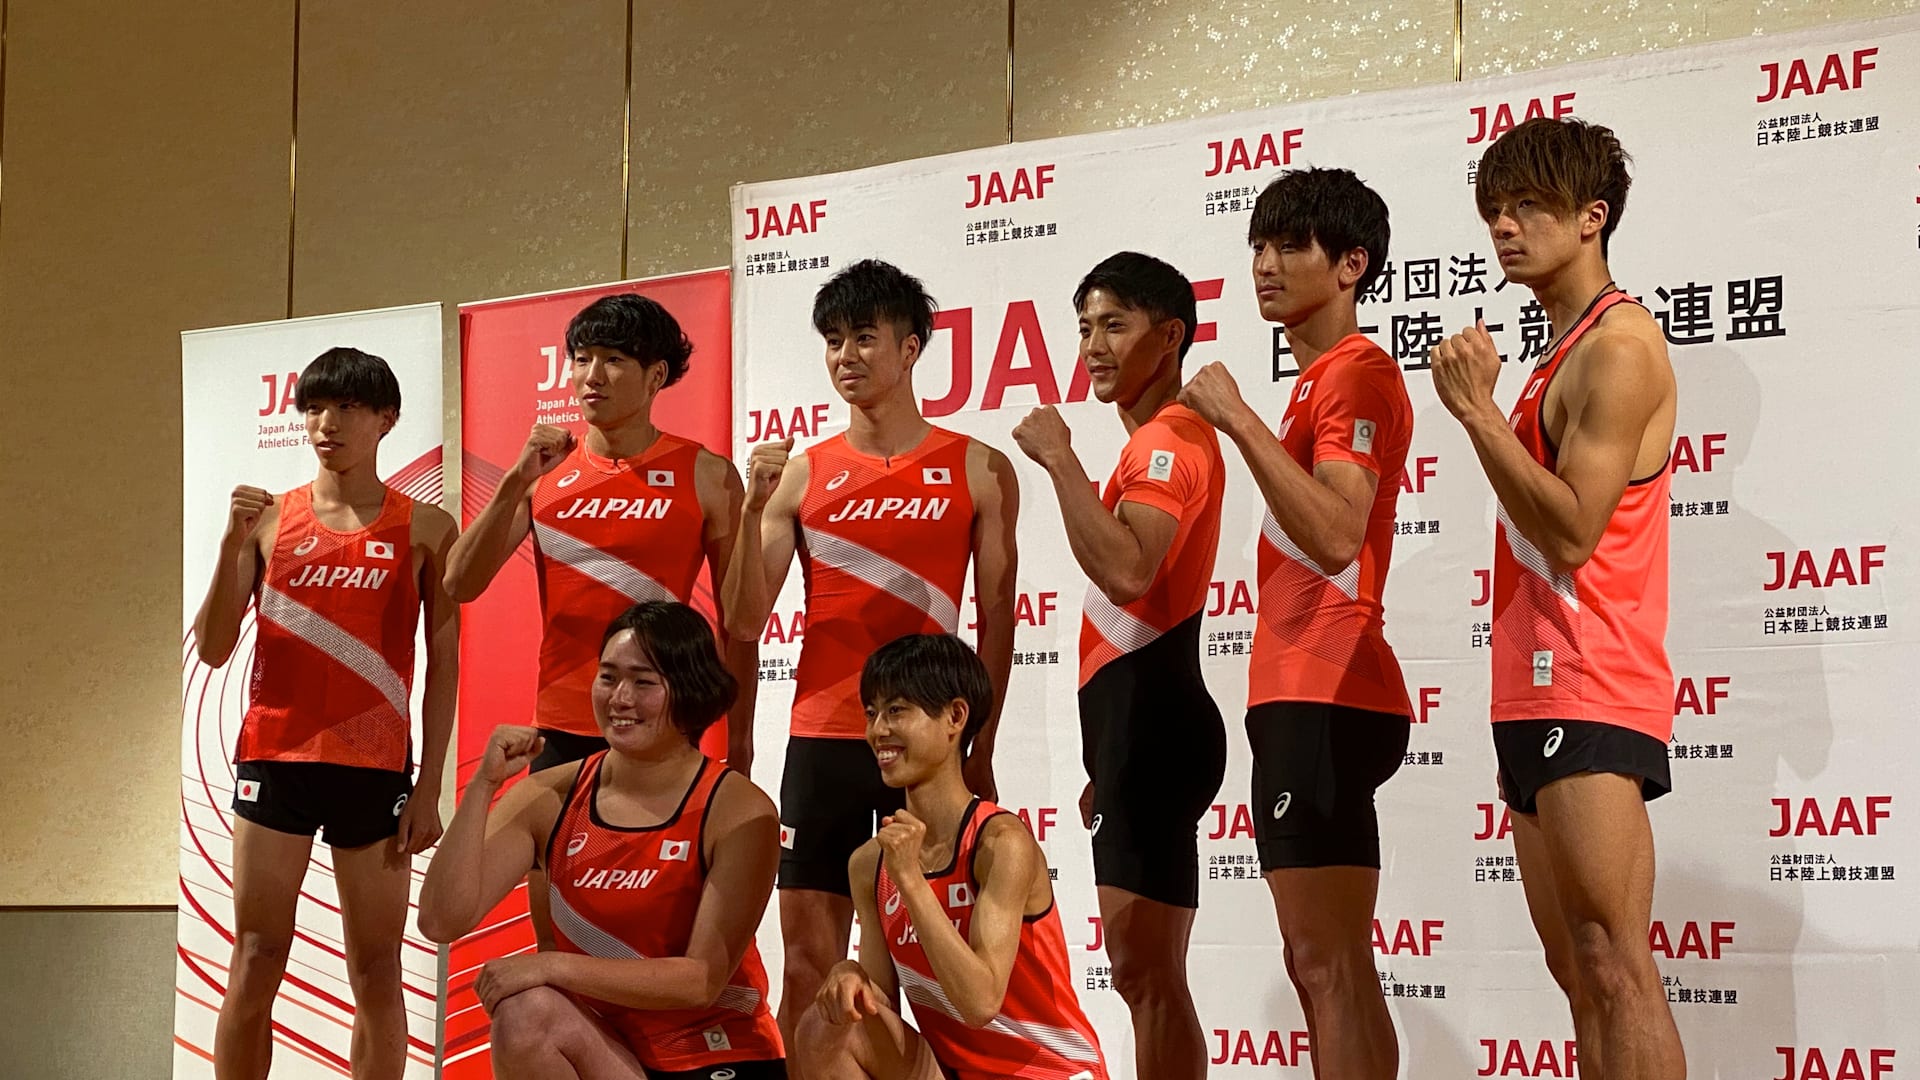 On your mark: Japanese athletes locked in on Tokyo 2020 with 